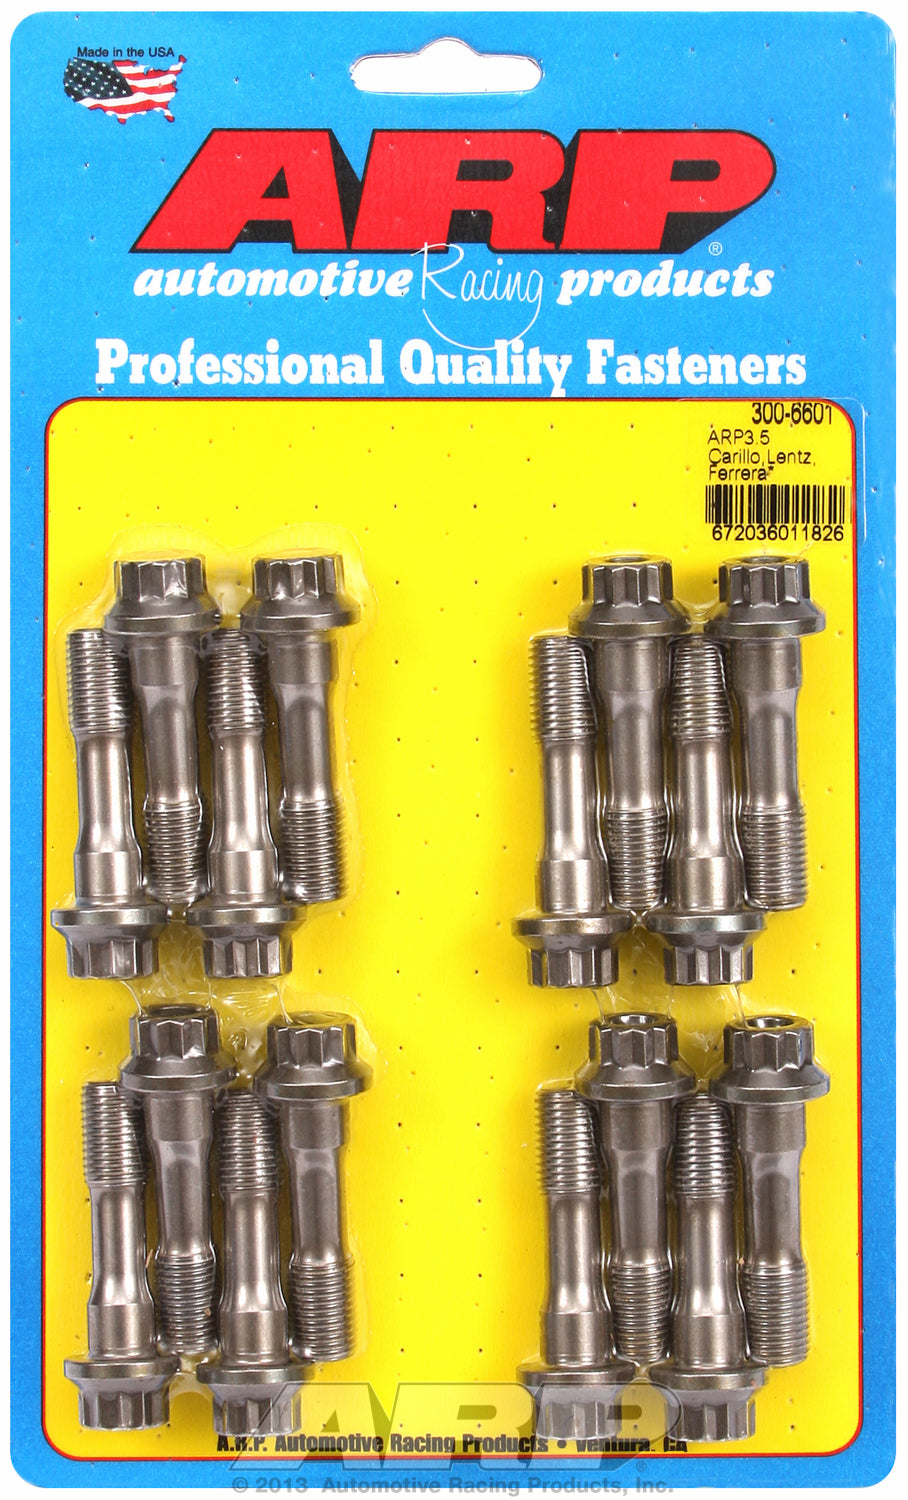 ARP3.5 General Replacement Rod Bolt Kit Complete - Set of 16